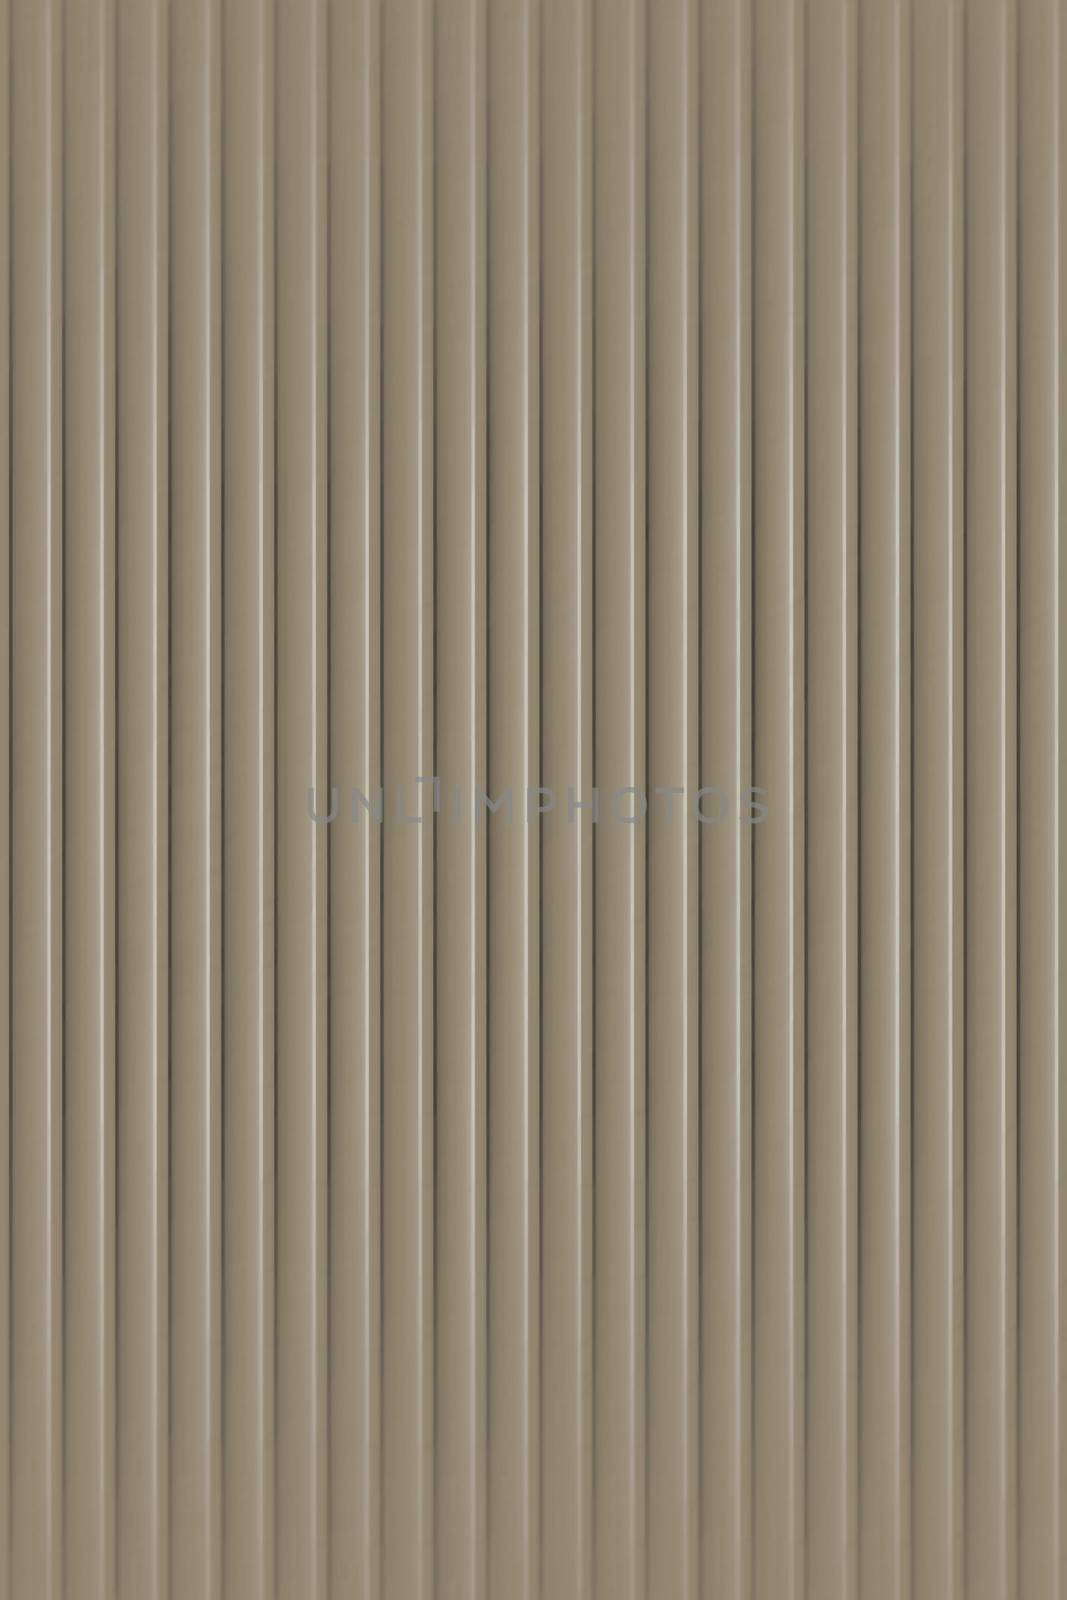 Abstract soft stripes pattern background, graphic art vertical lines, vintage texture by clusterx